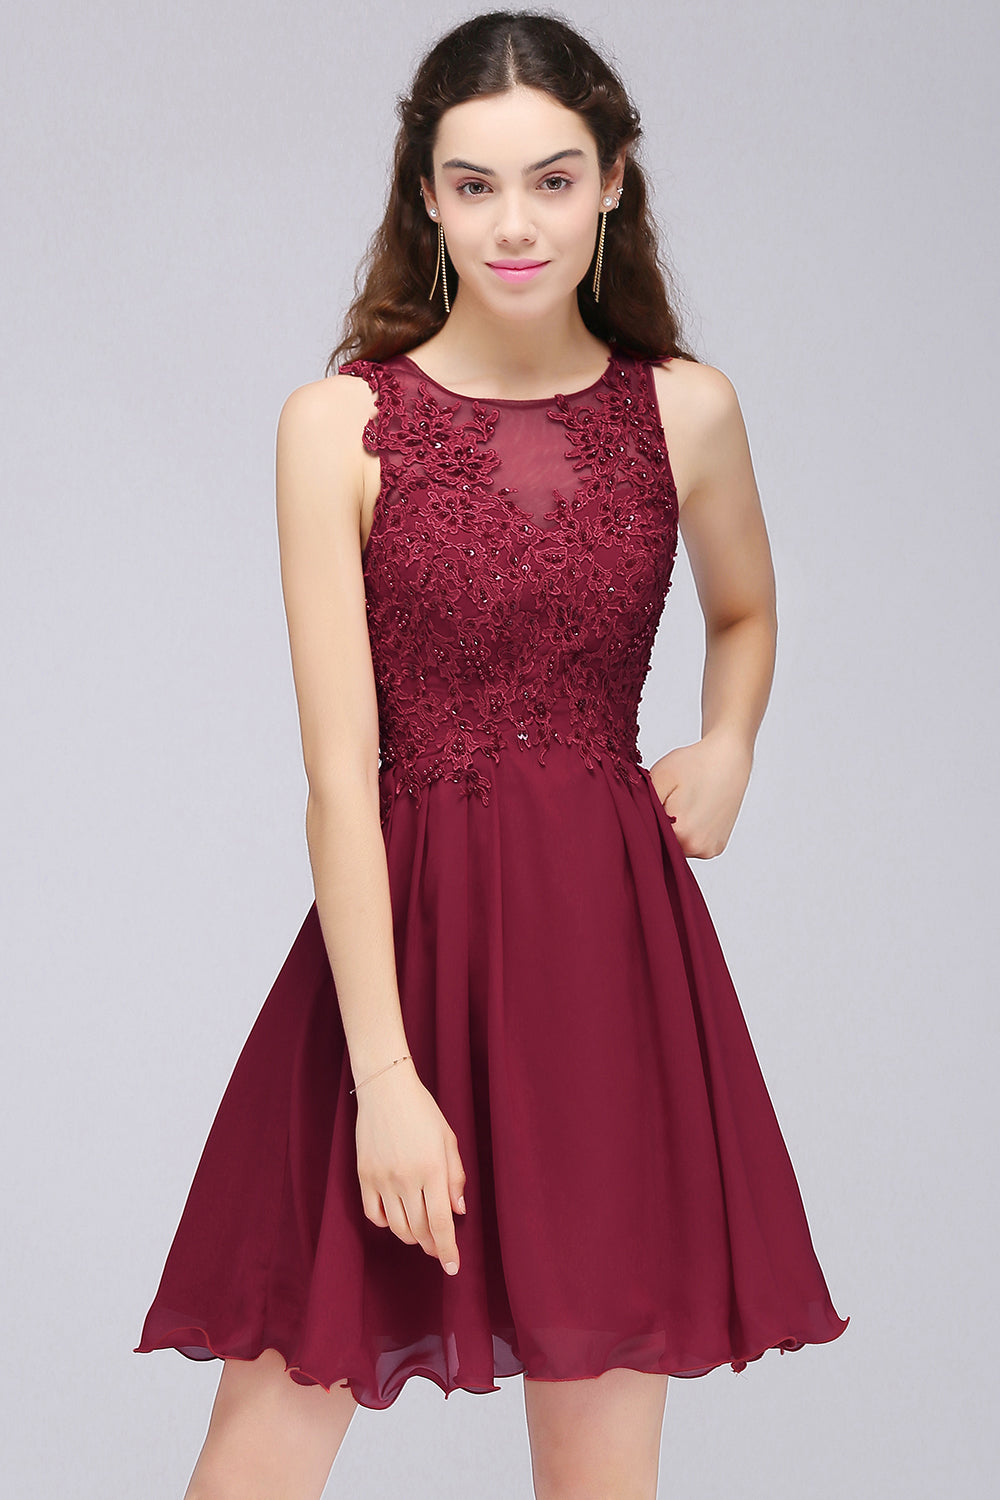 Lovely Lace Short Burgundy Bridesmaid Dress with Appliques